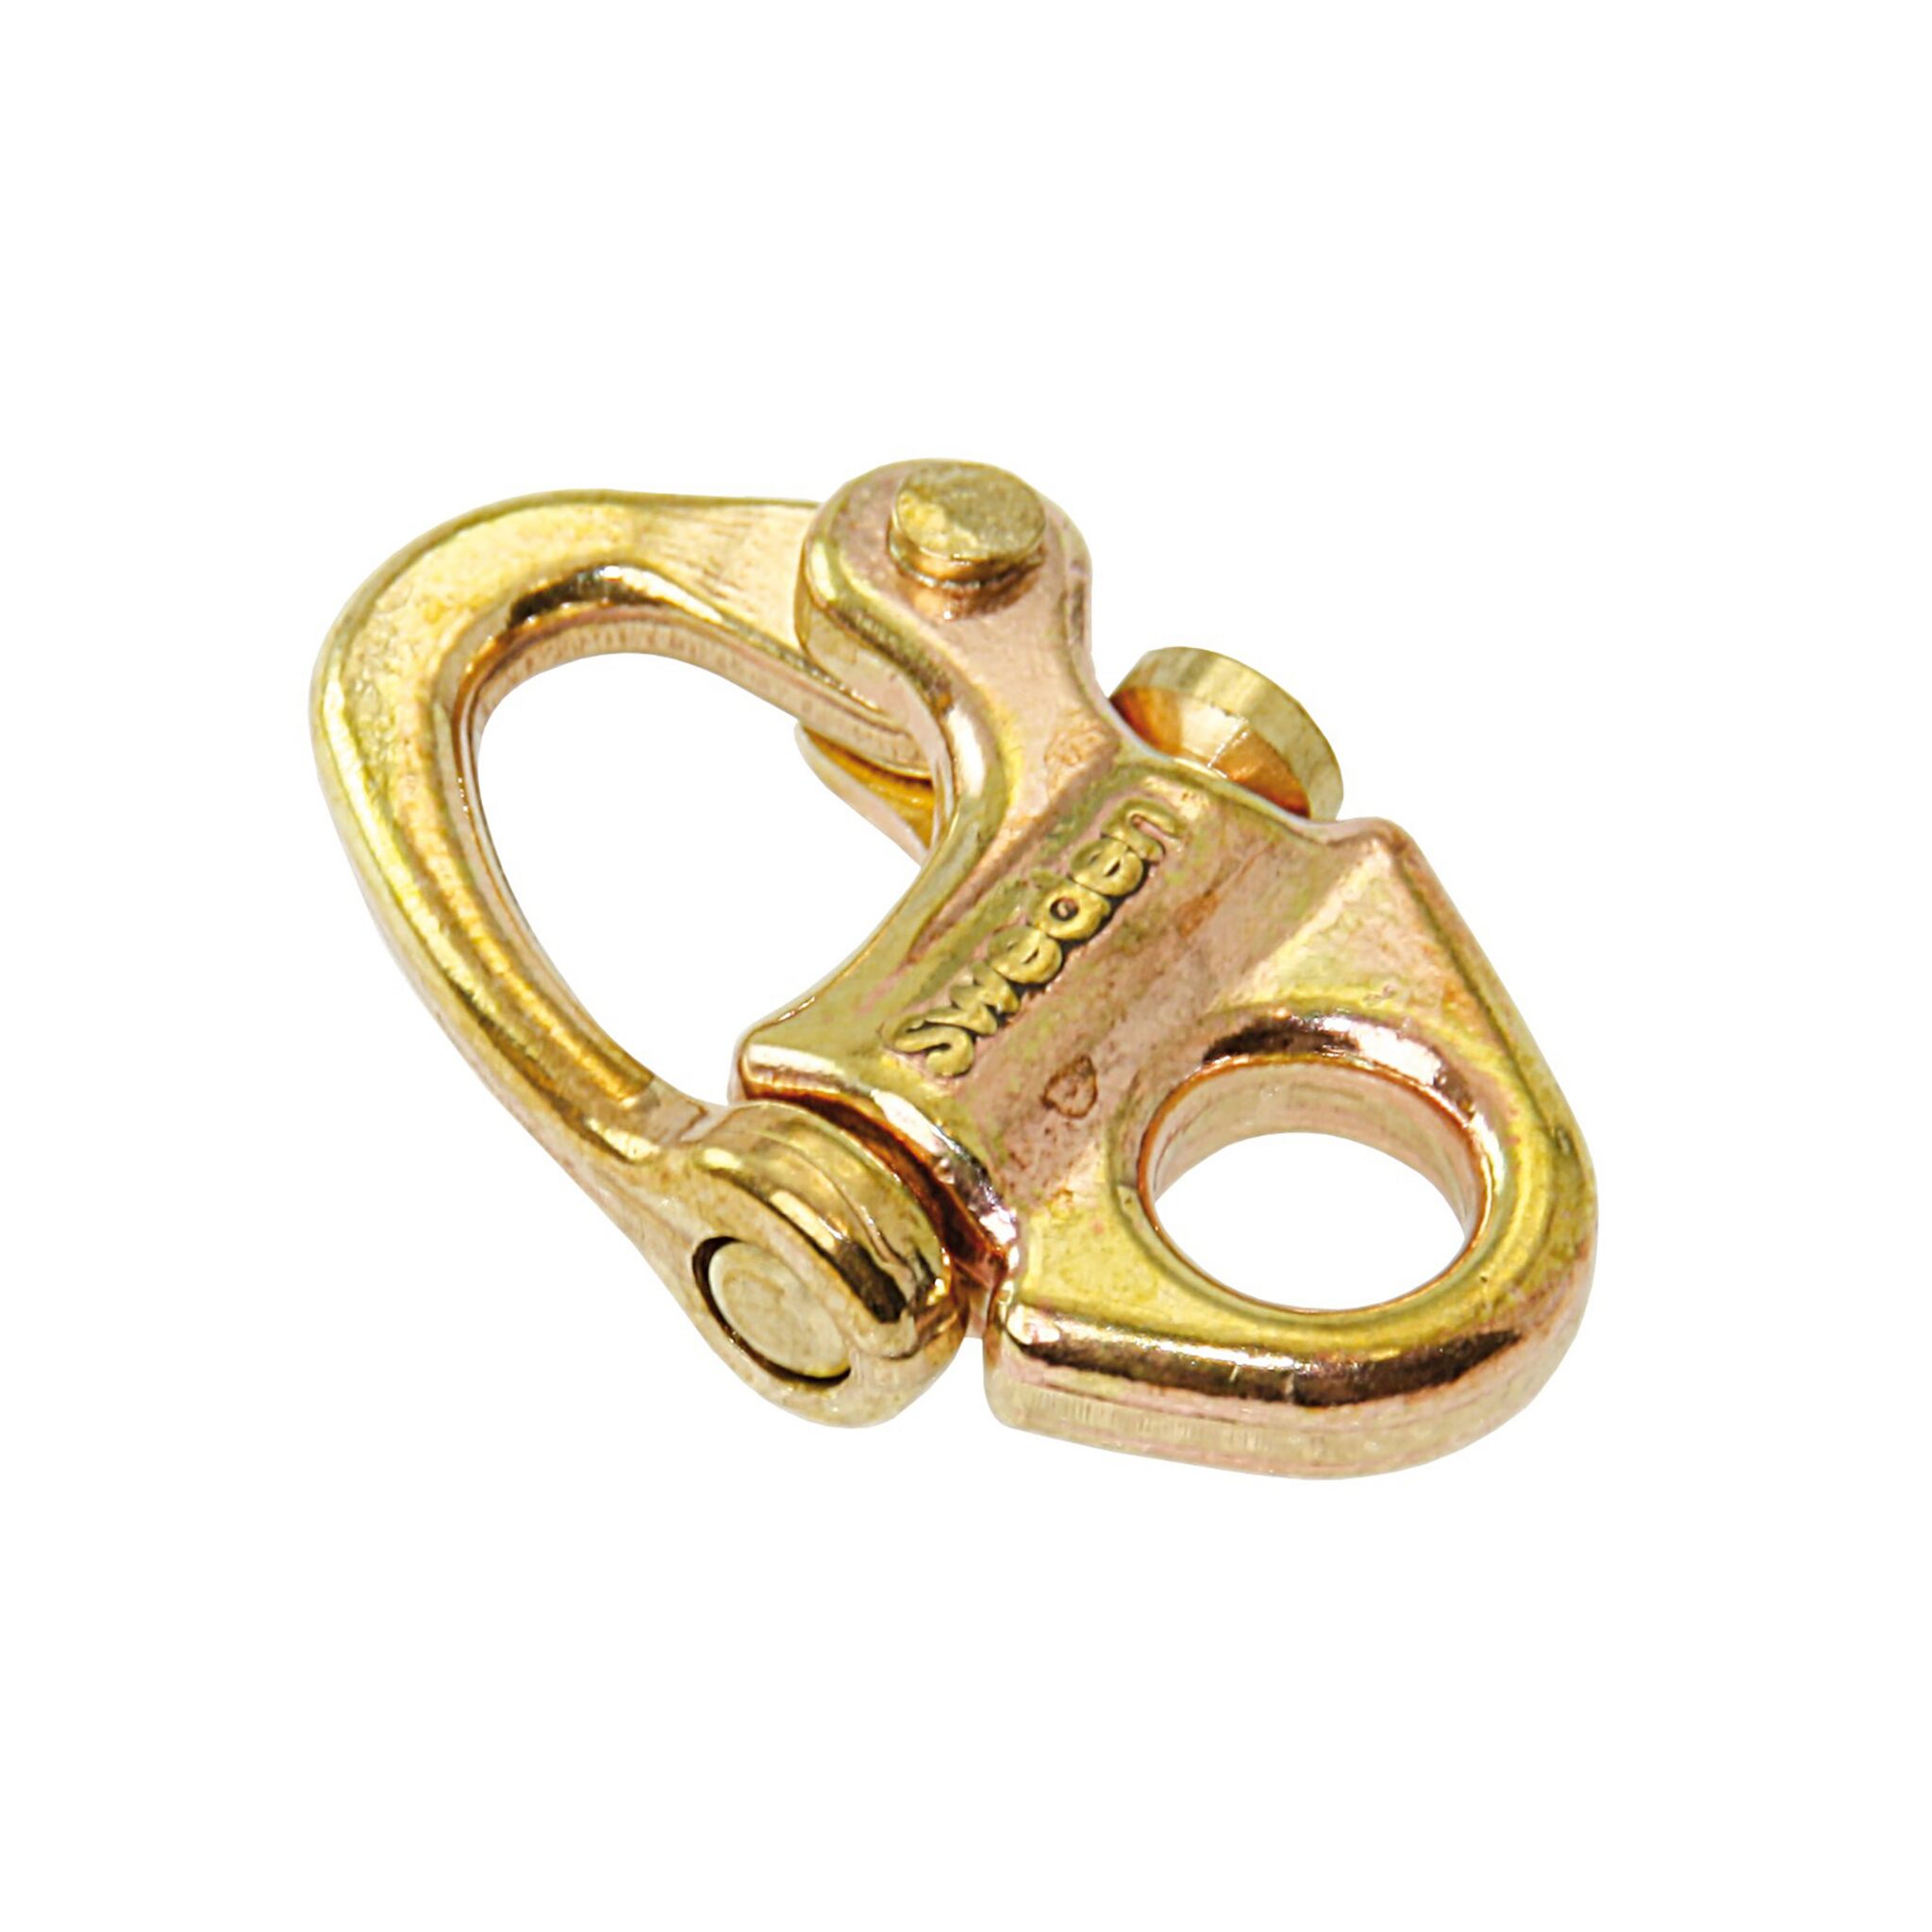 Patent shackle bronze with fixed eyelet